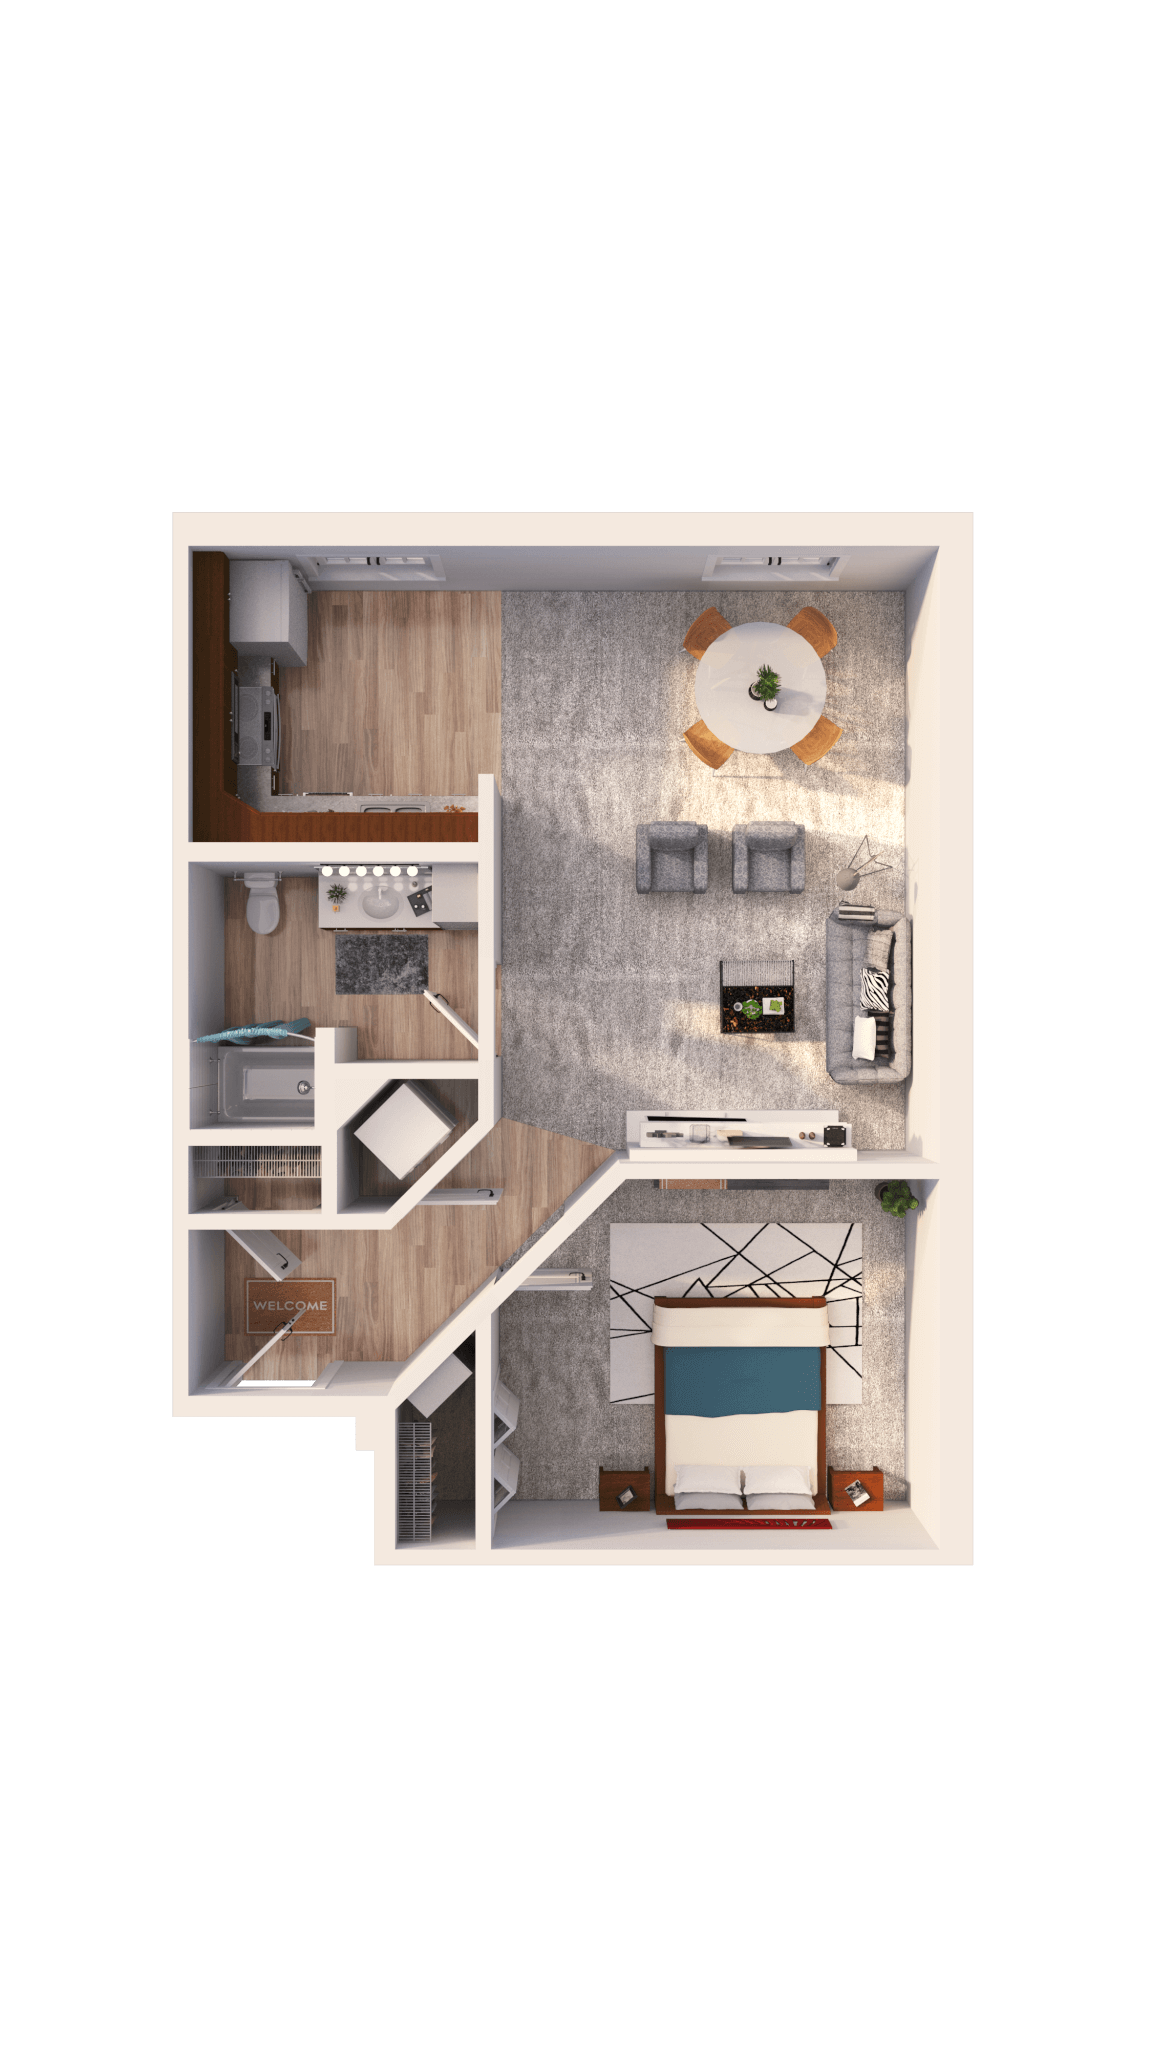 Assisted Living 1 Bedroom Apartment Floor Plan